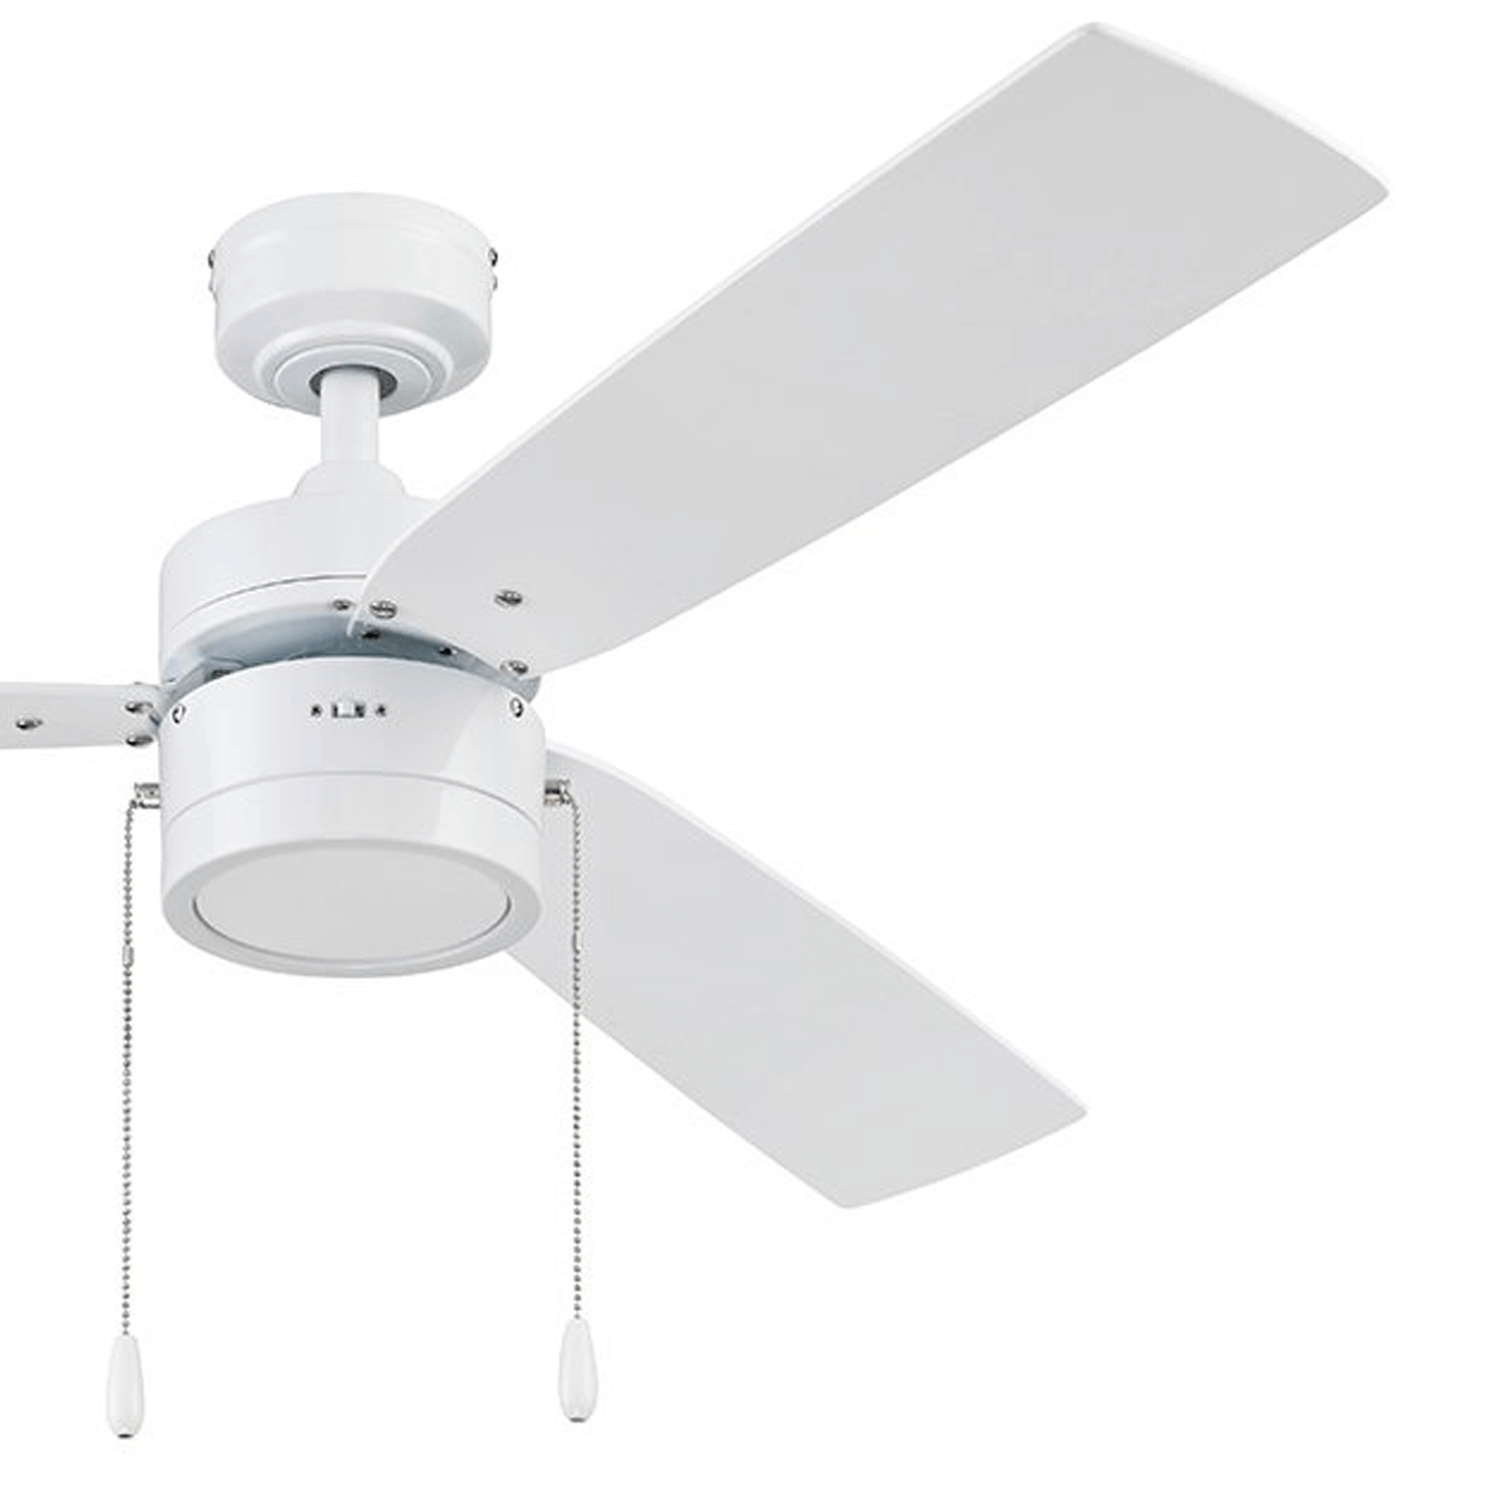 52 Inch Madrona, White, Pull Chain, Ceiling Fan by Prominence Home